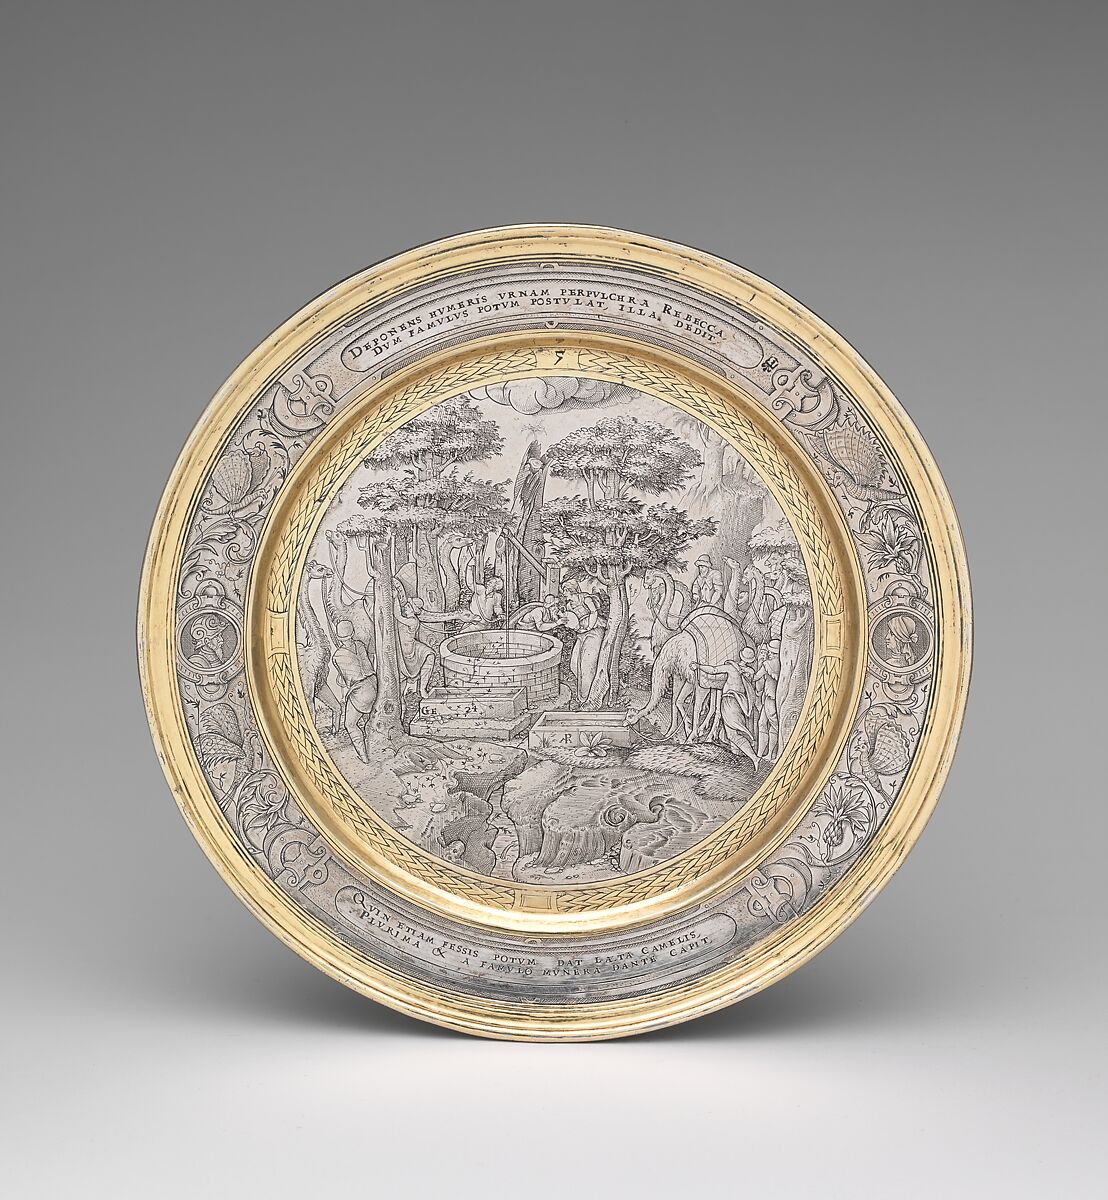 Rebecca at the Well, Possibly engraved by P.M., Silver, partly gilded, probably British 